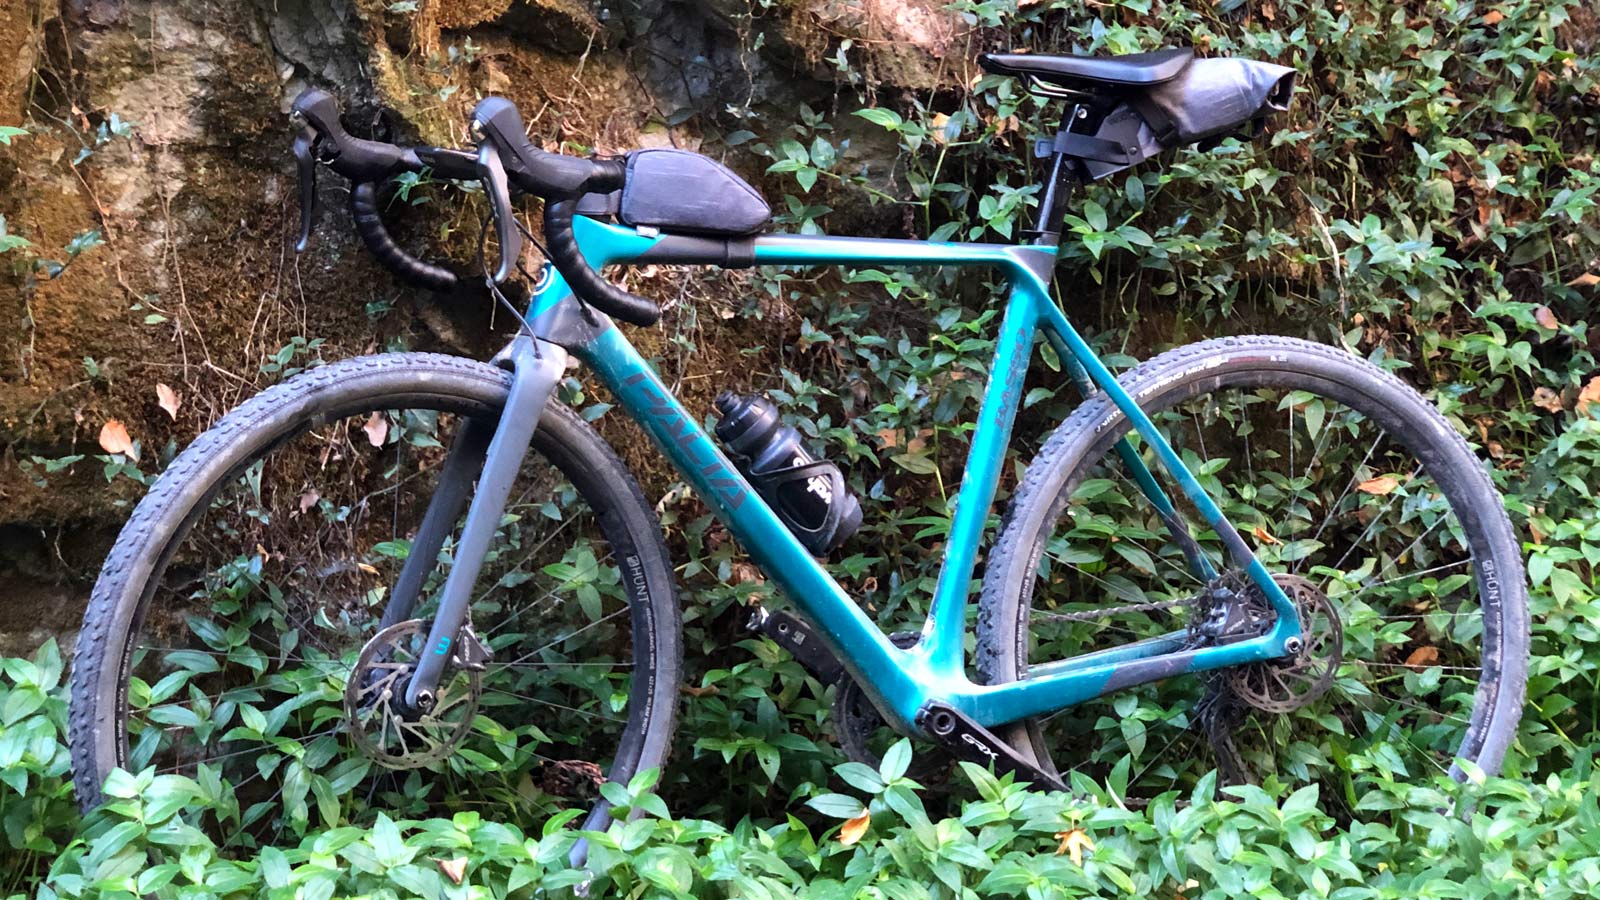 Basso Palta fast carbon gravel road bike - review: road-inspired fast, stiff, made-in-Italy, non-driveside